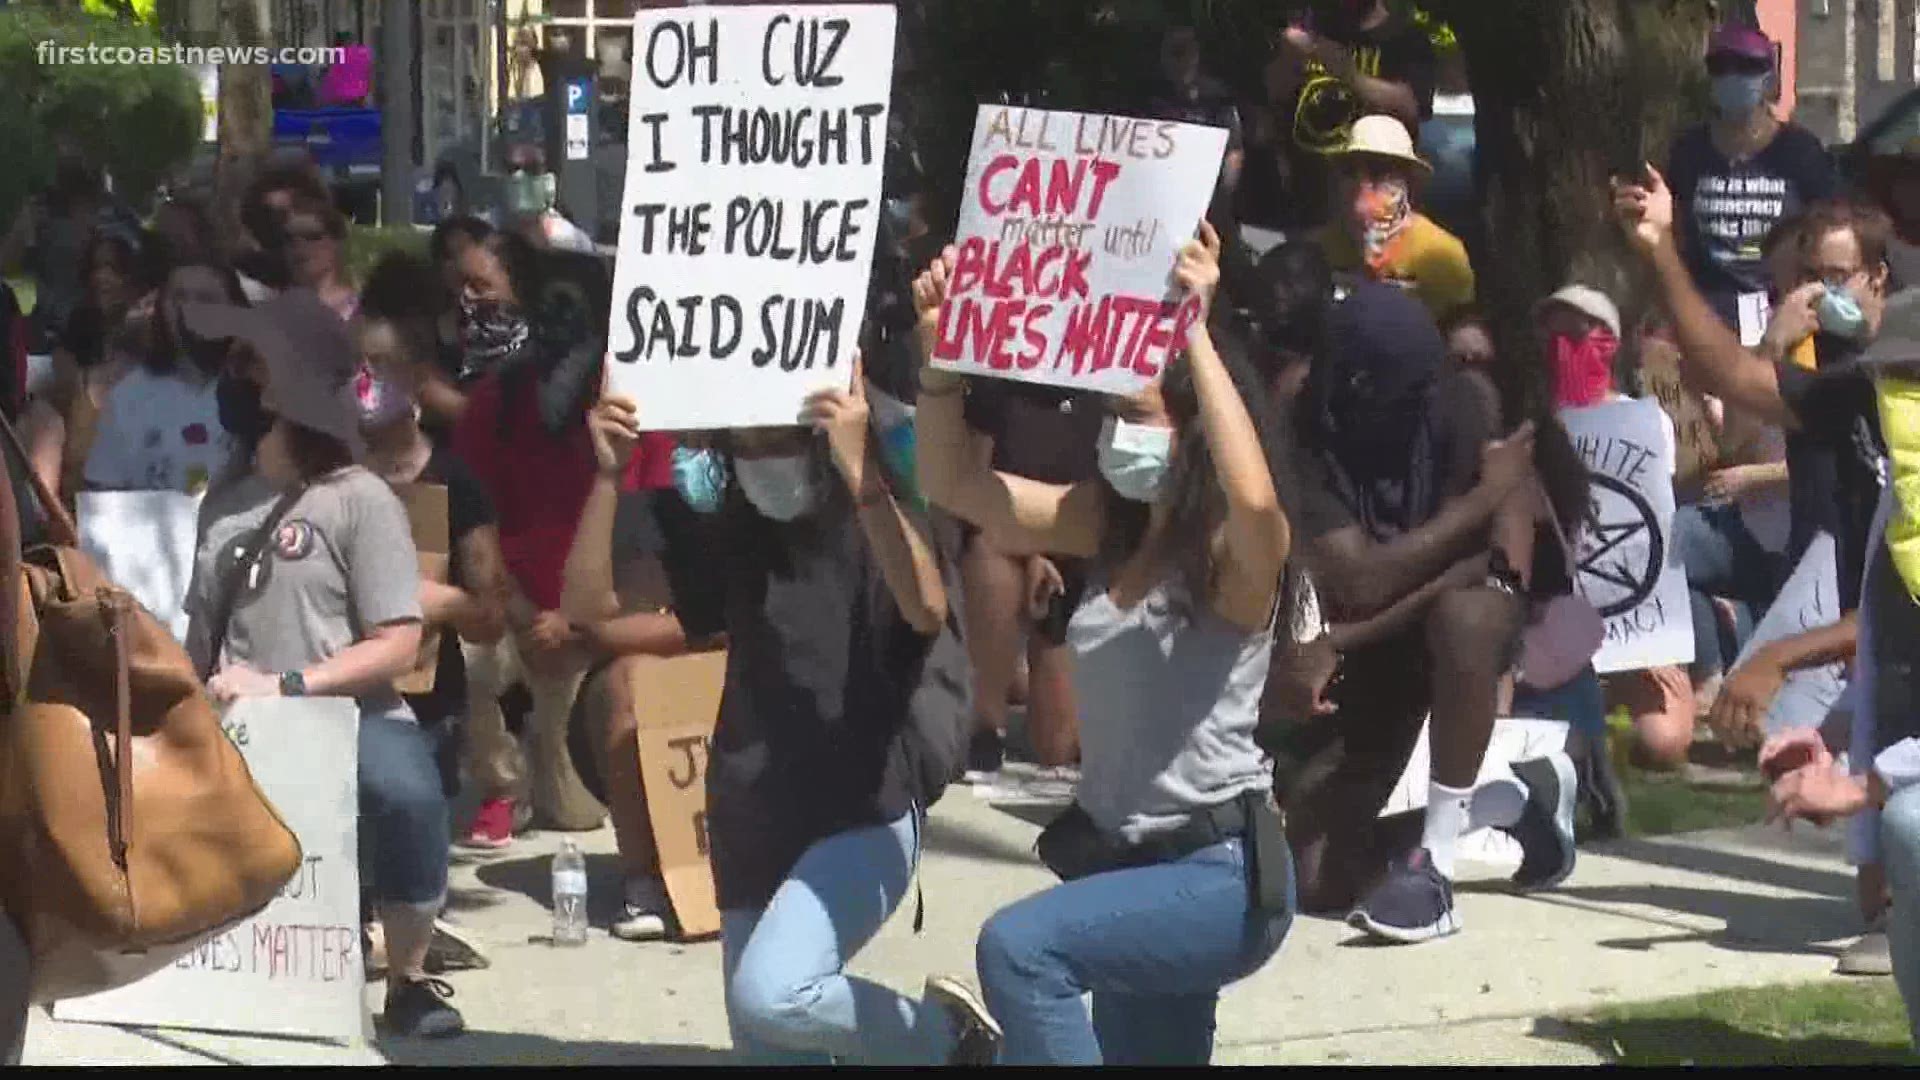 Protesters rallied against police brutality in St. Augustine.